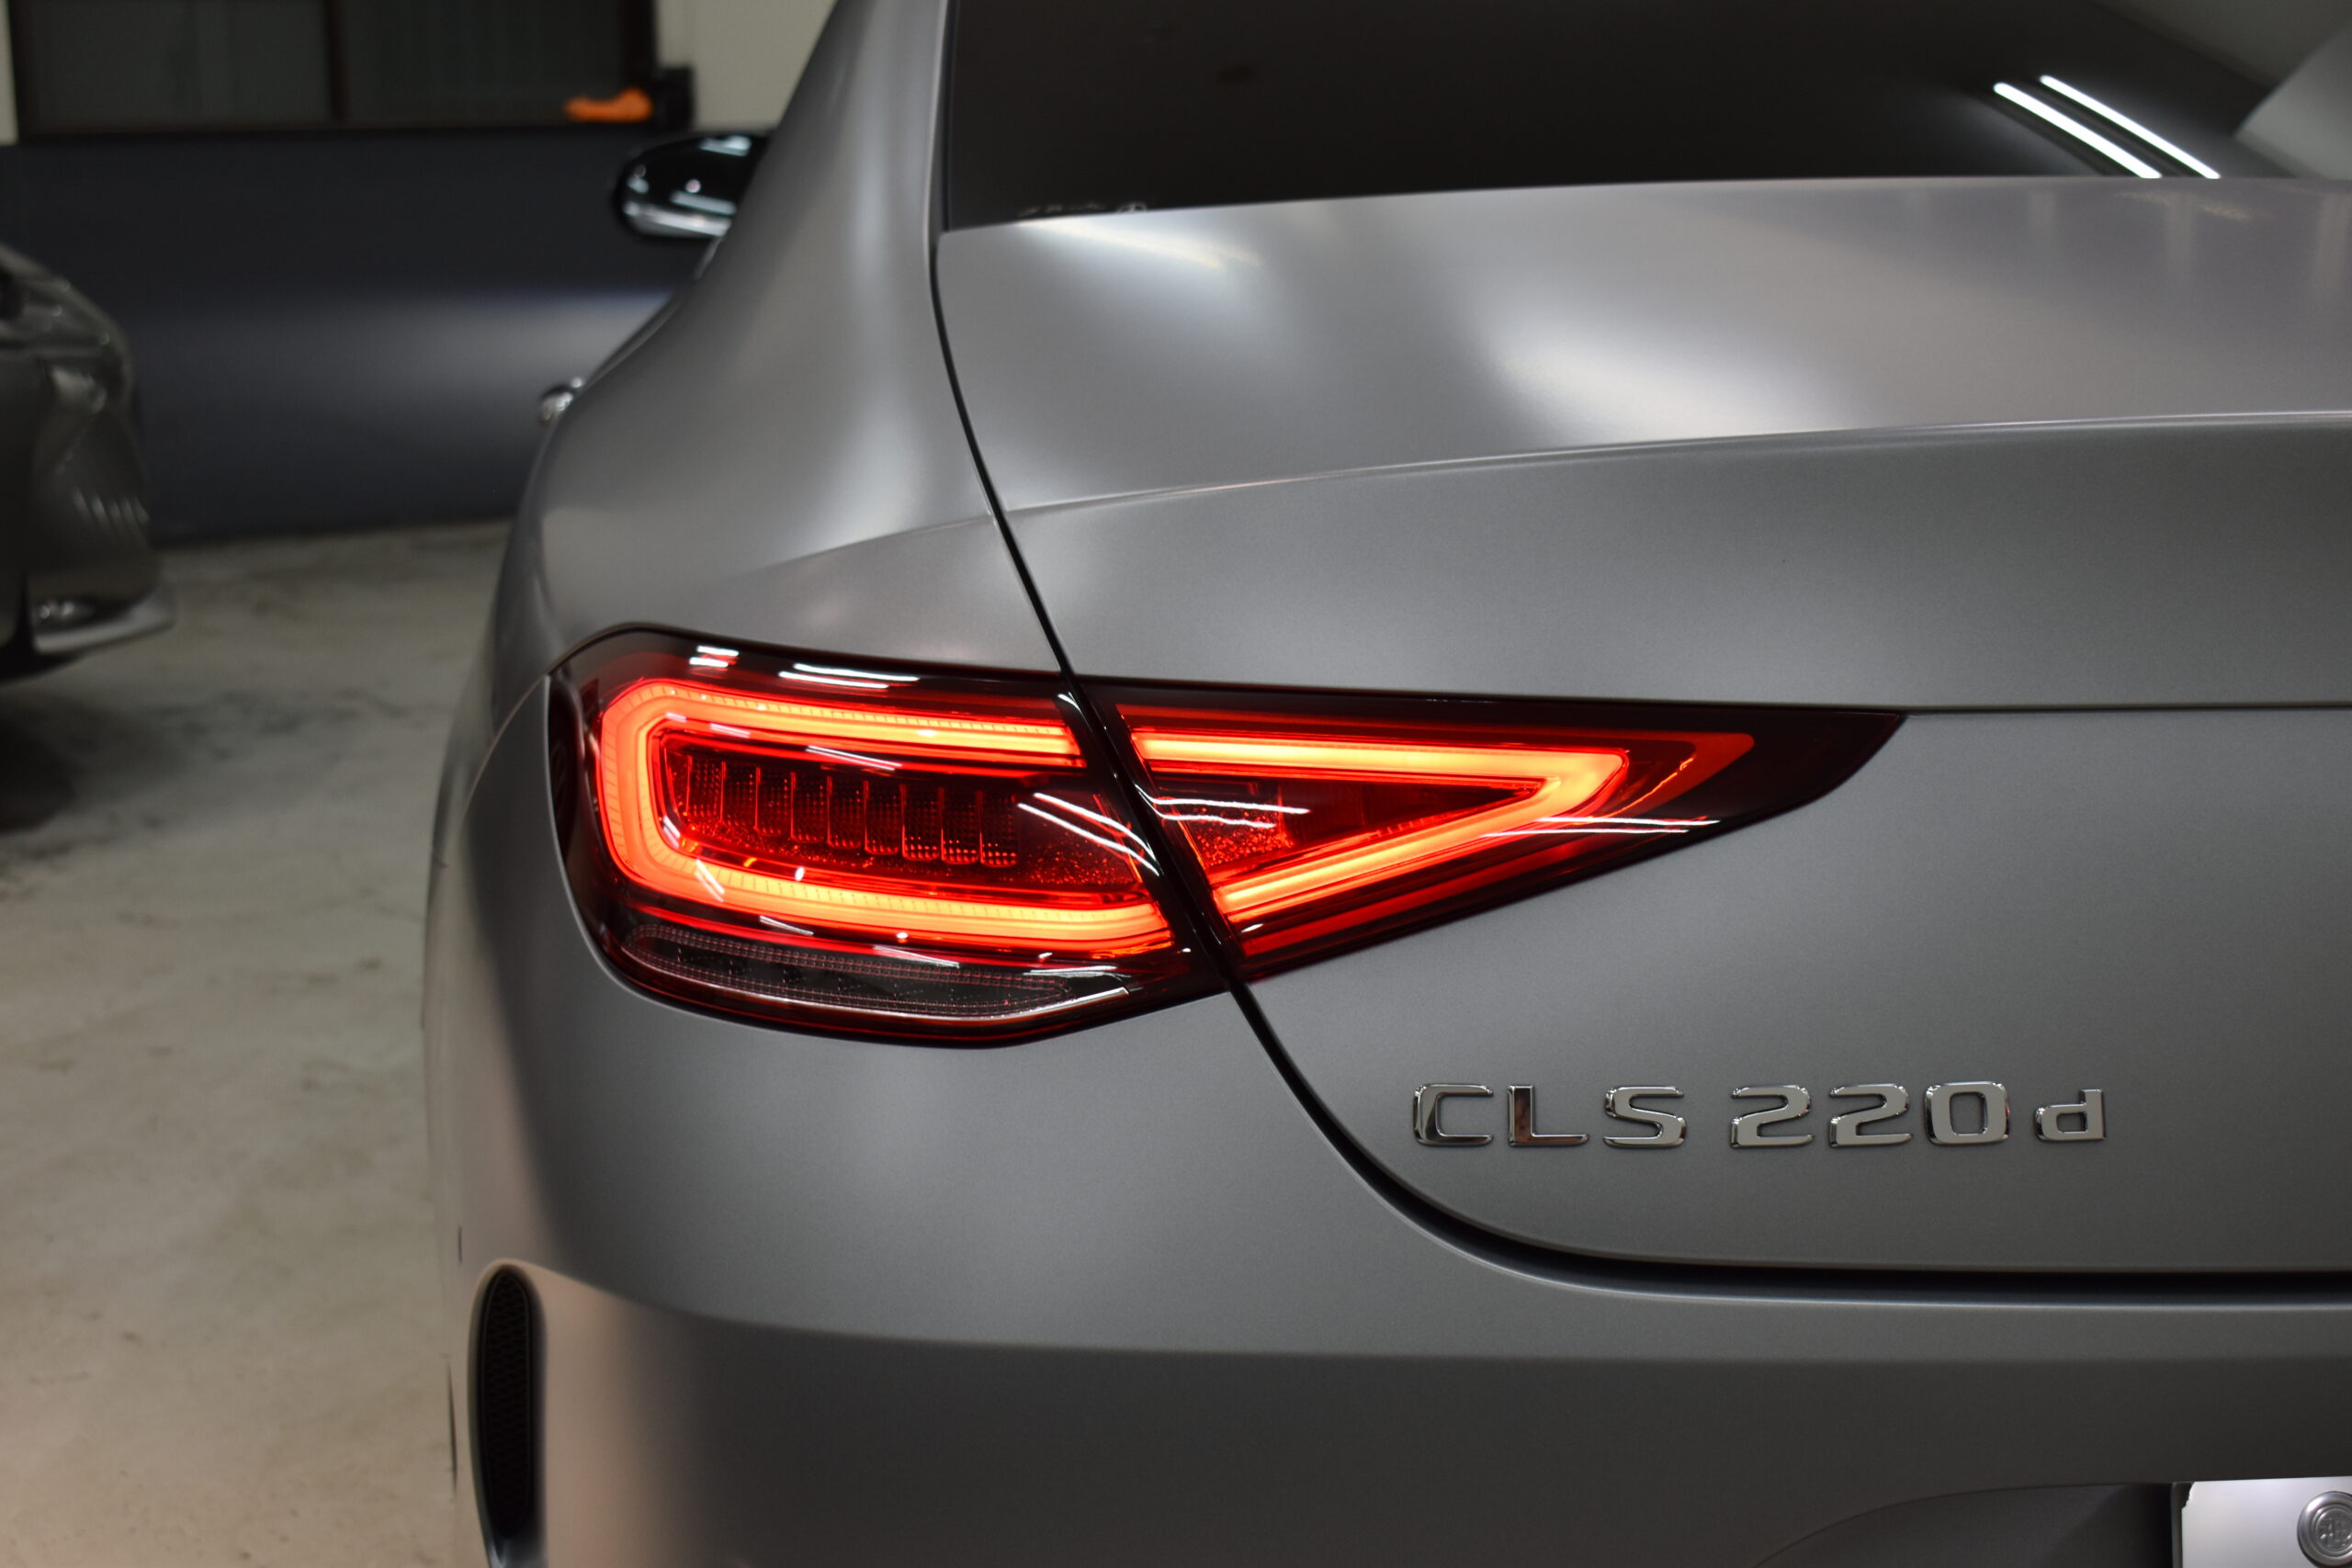 CLS220ｄ